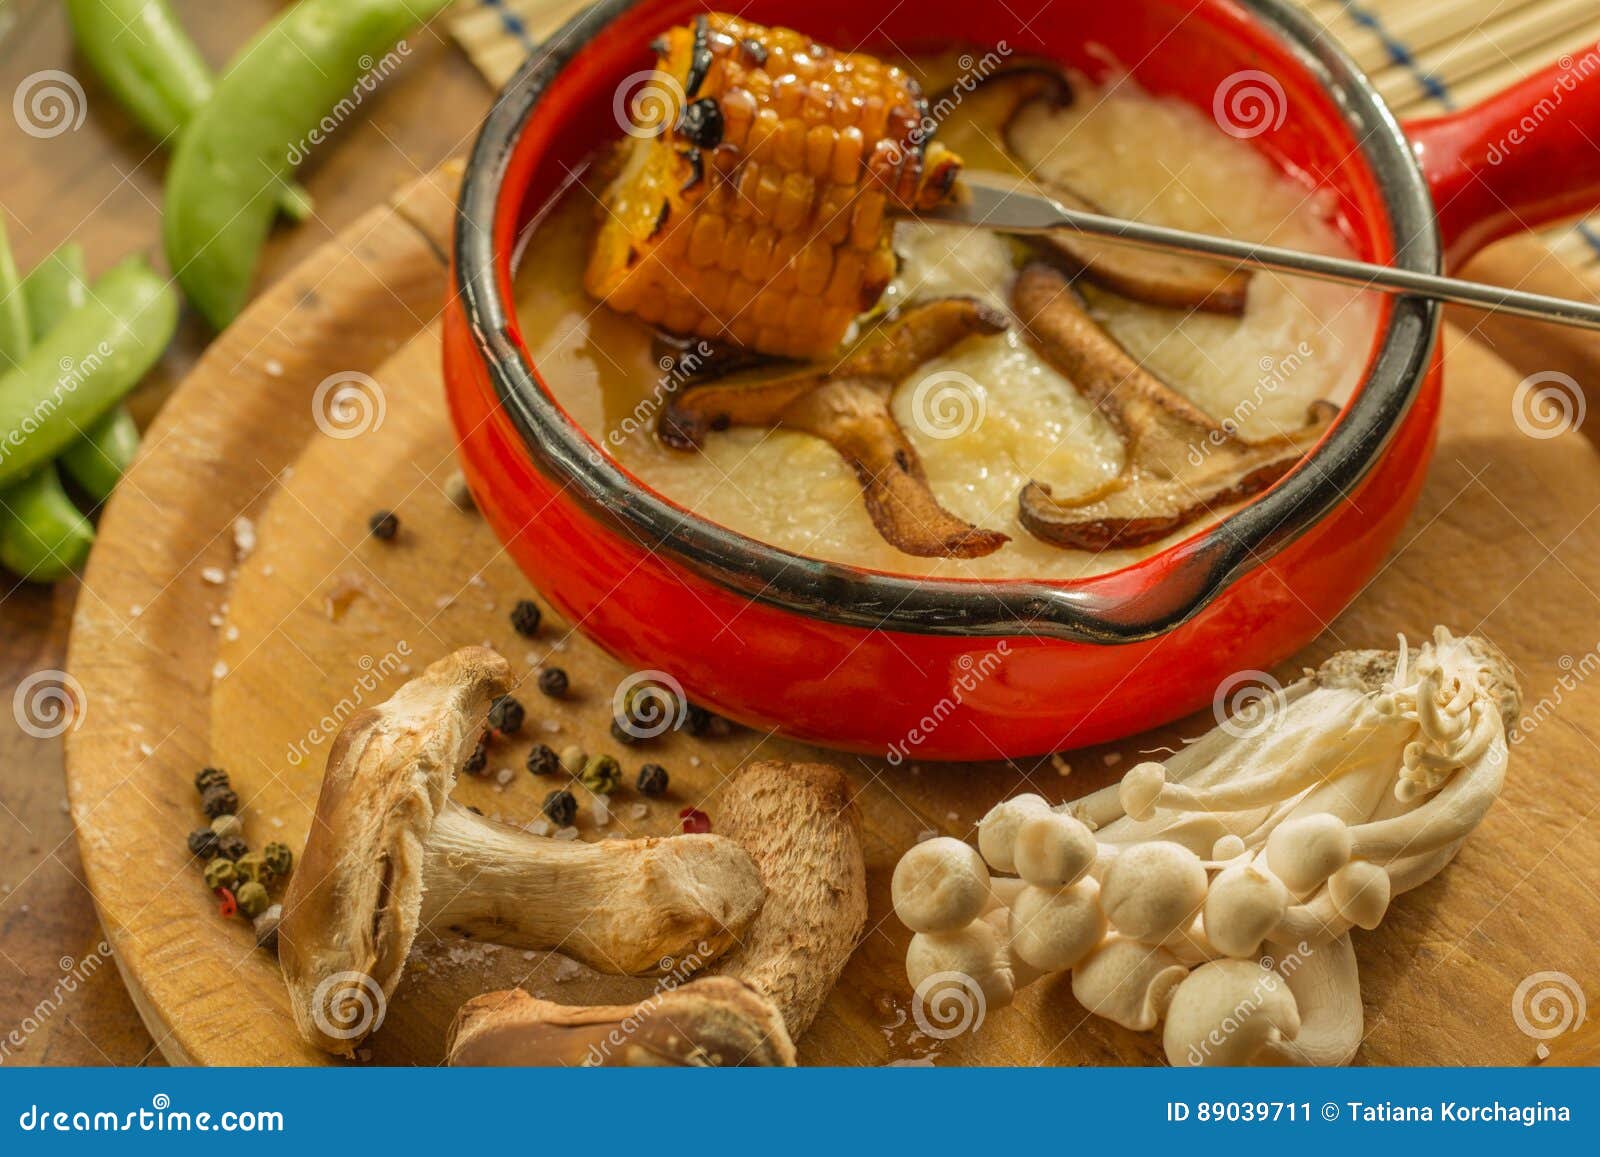 Roasted Maize with Mushrooms and Smelted Goat Cheese. Stock Image ...